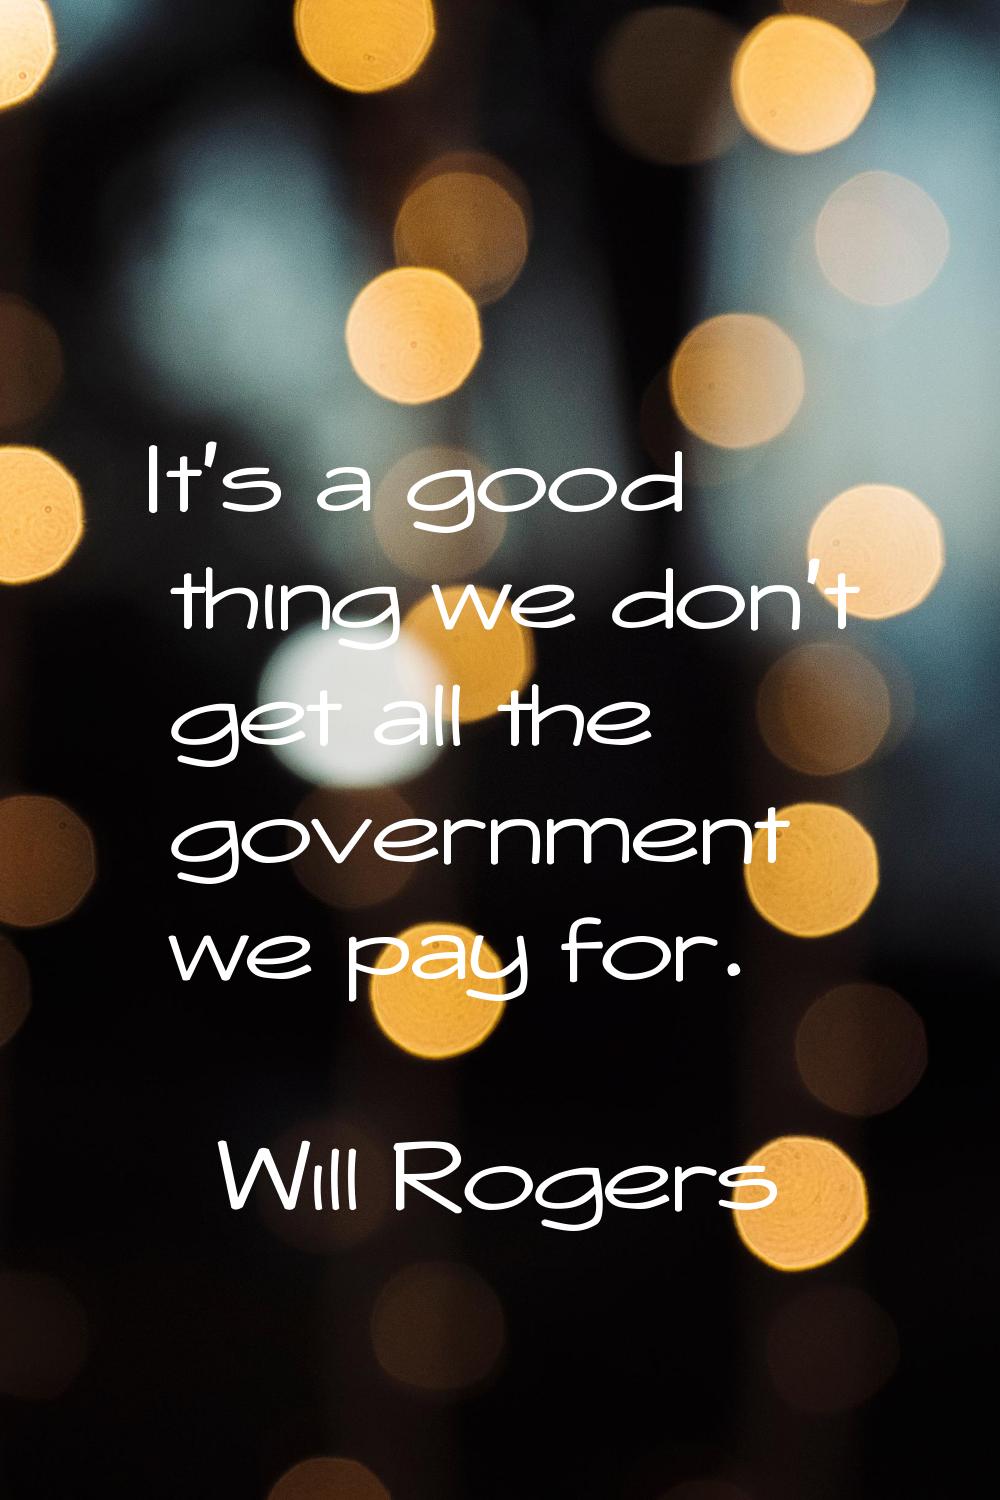 It's a good thing we don't get all the government we pay for.